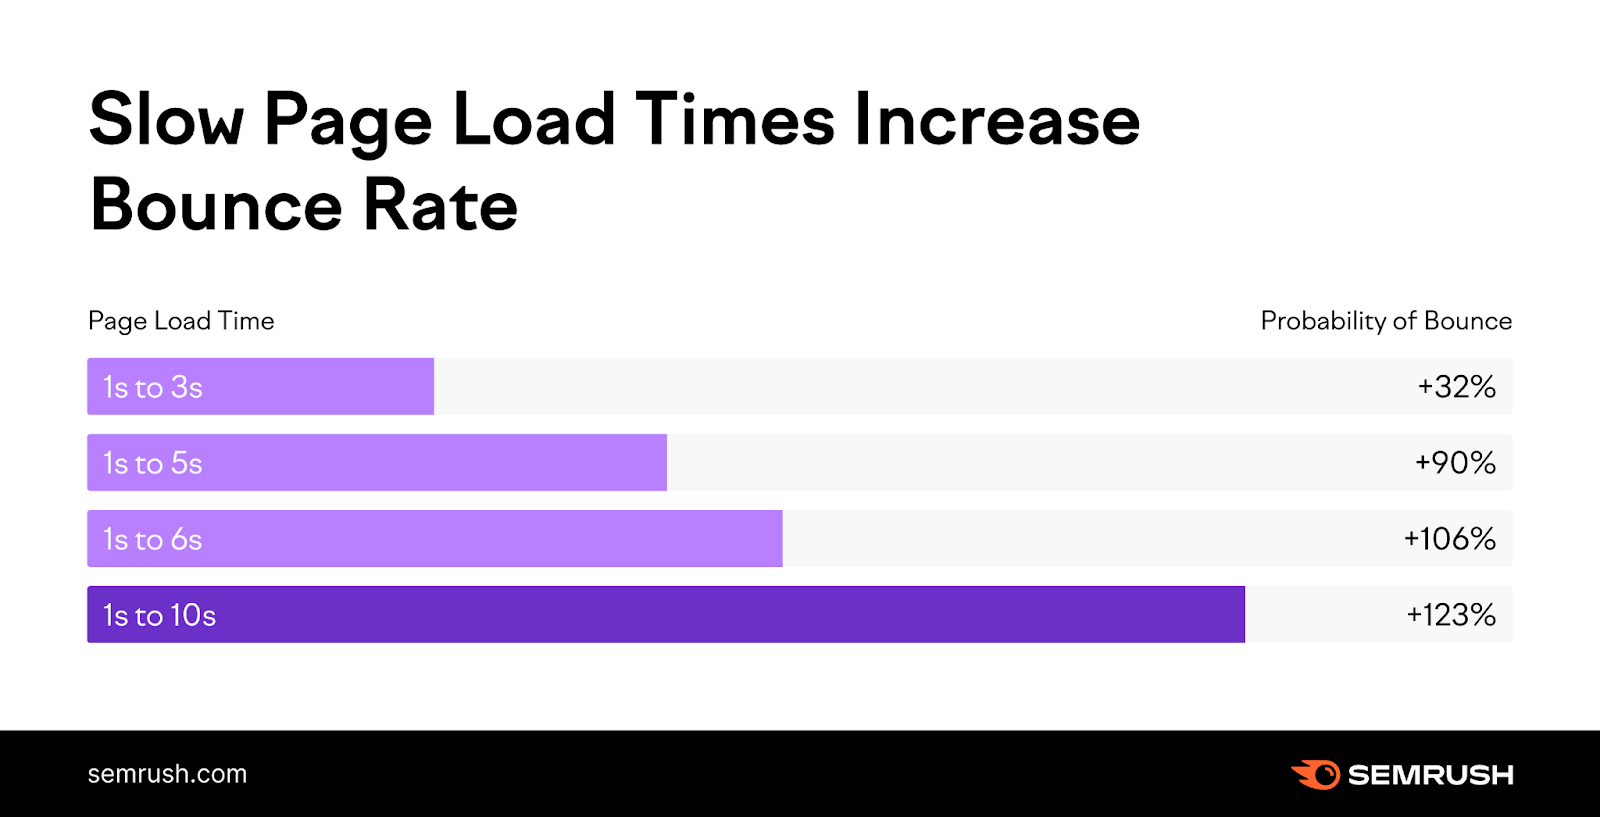 Increasing page load times also increase probably of bounce.